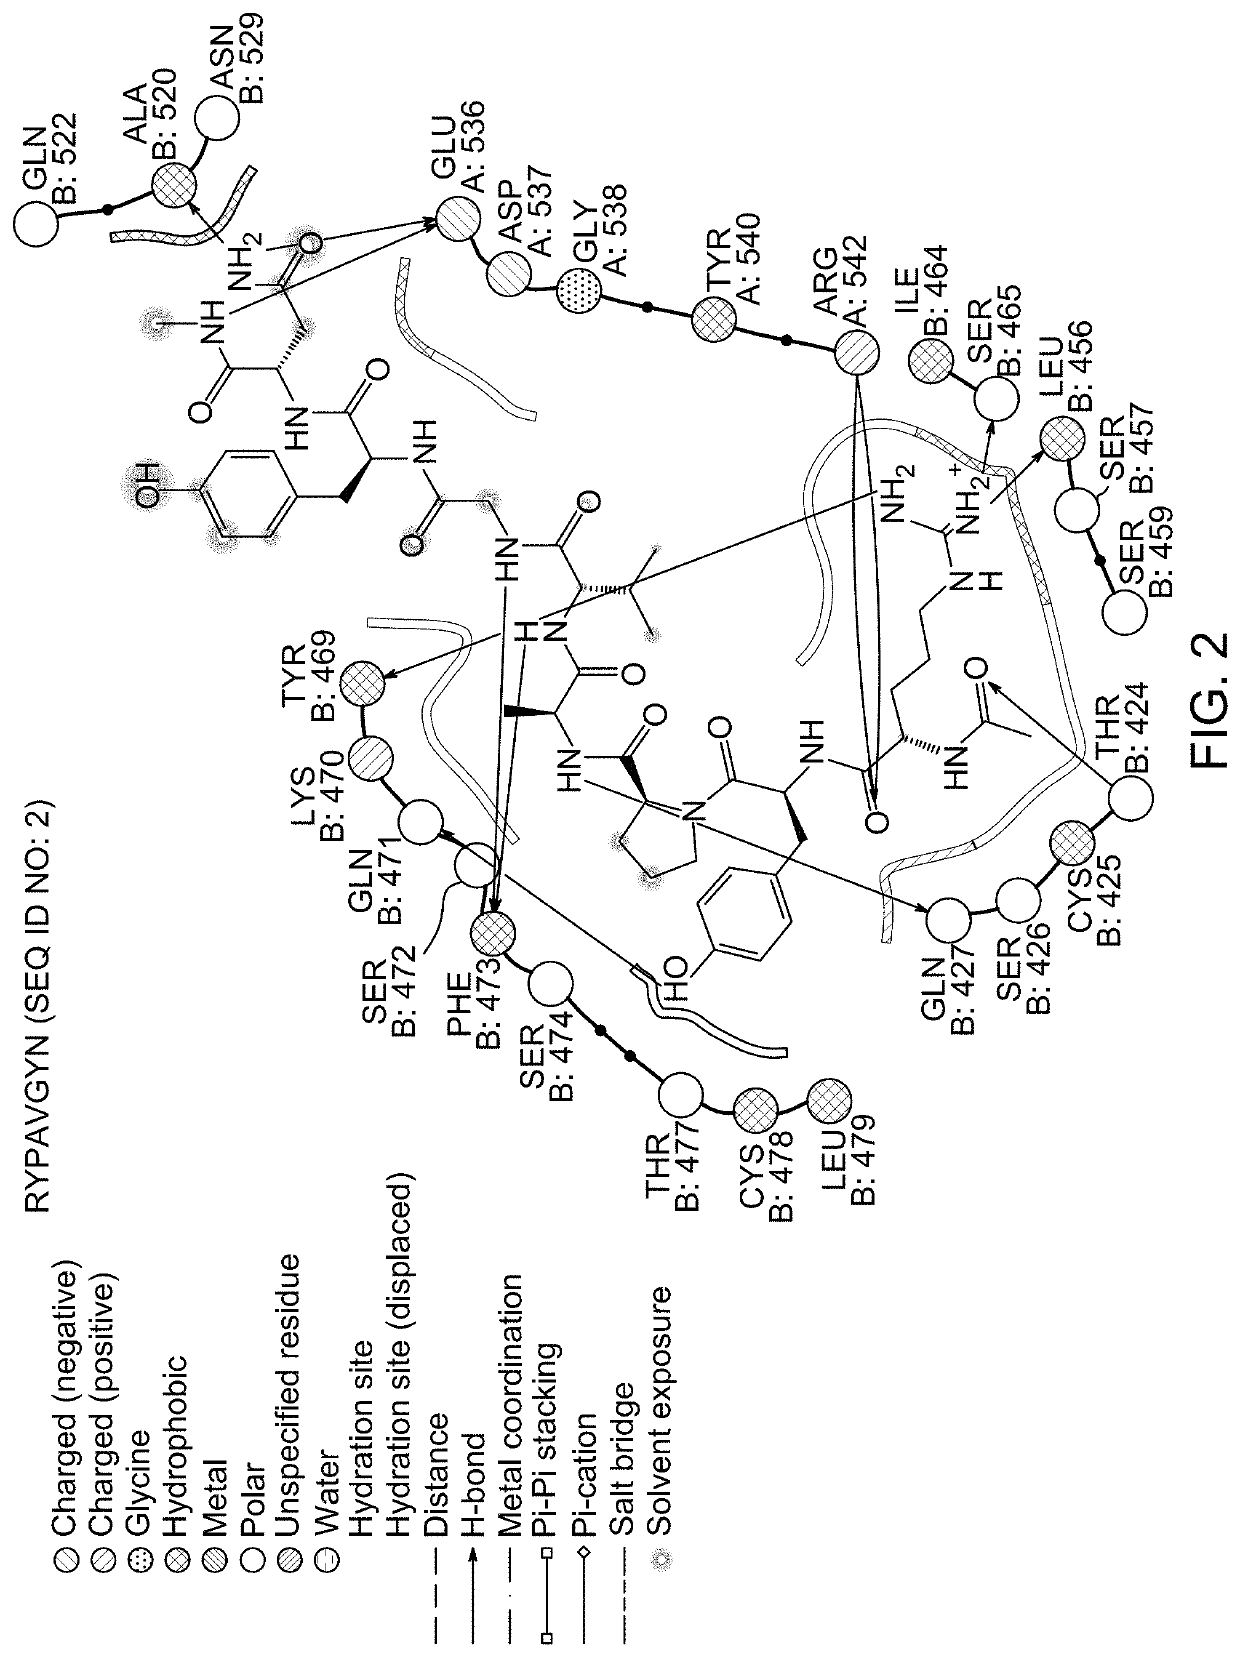 Antiviral peptides for treatment of the middle east respiratory syndrome